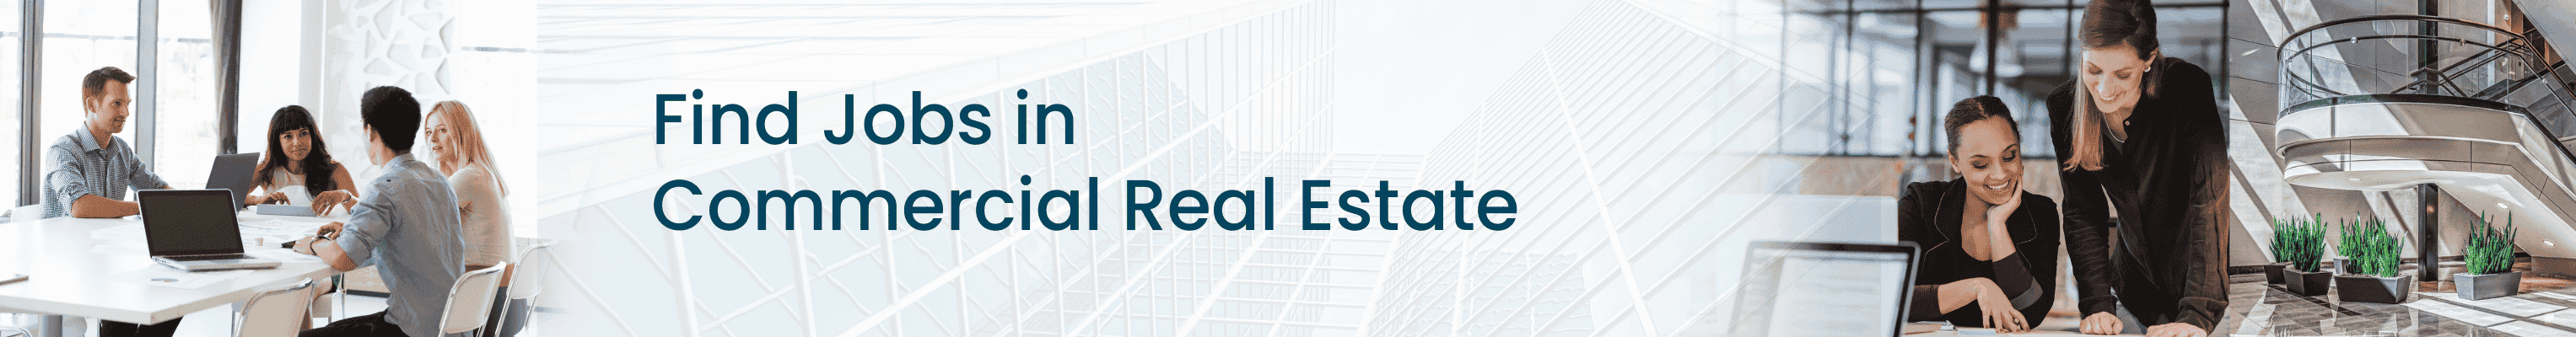 commercial real estate jobs